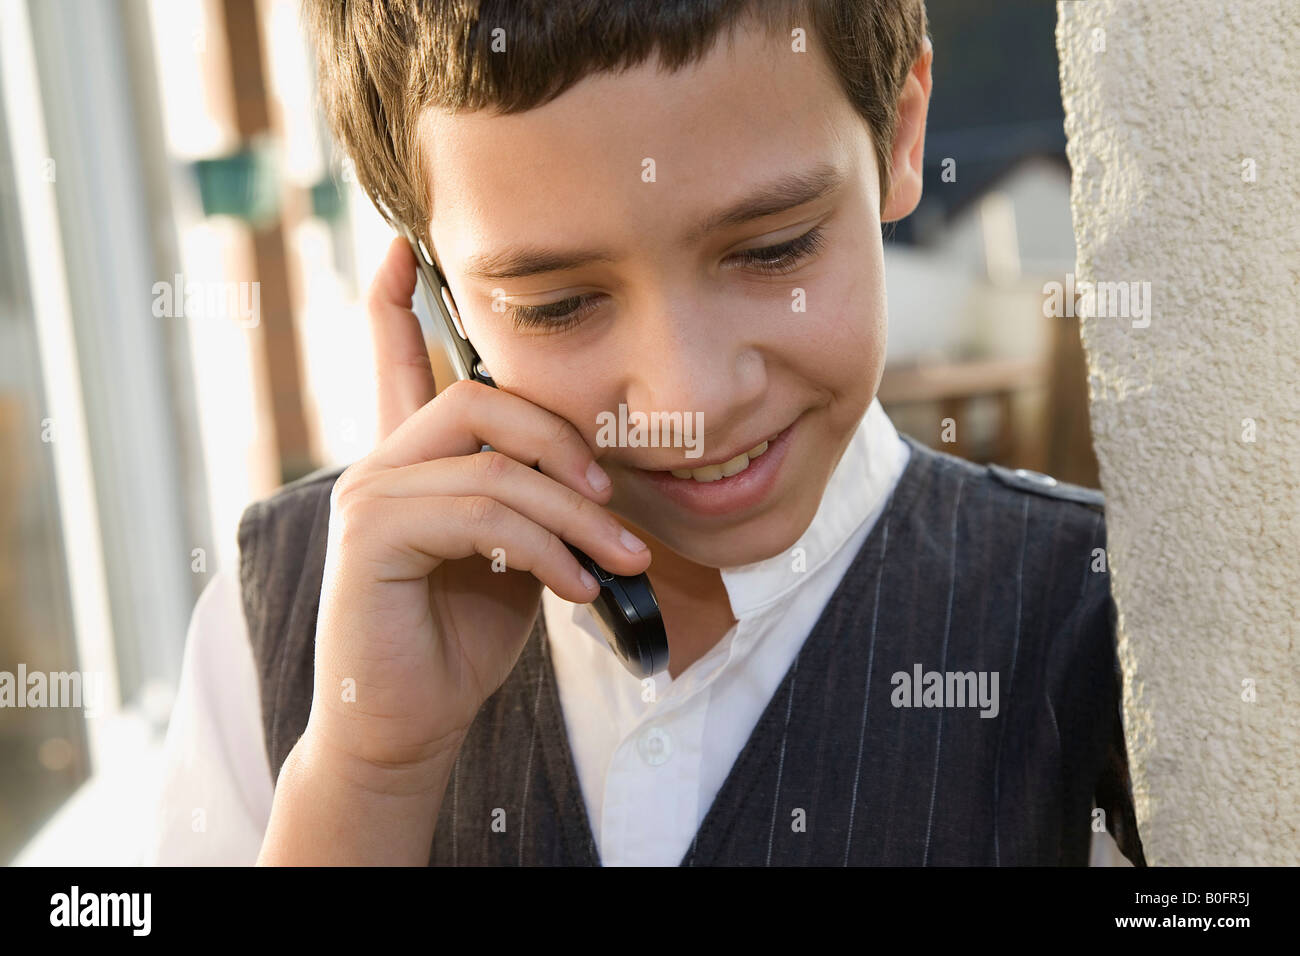 Young boy on cell phone Stock Photo